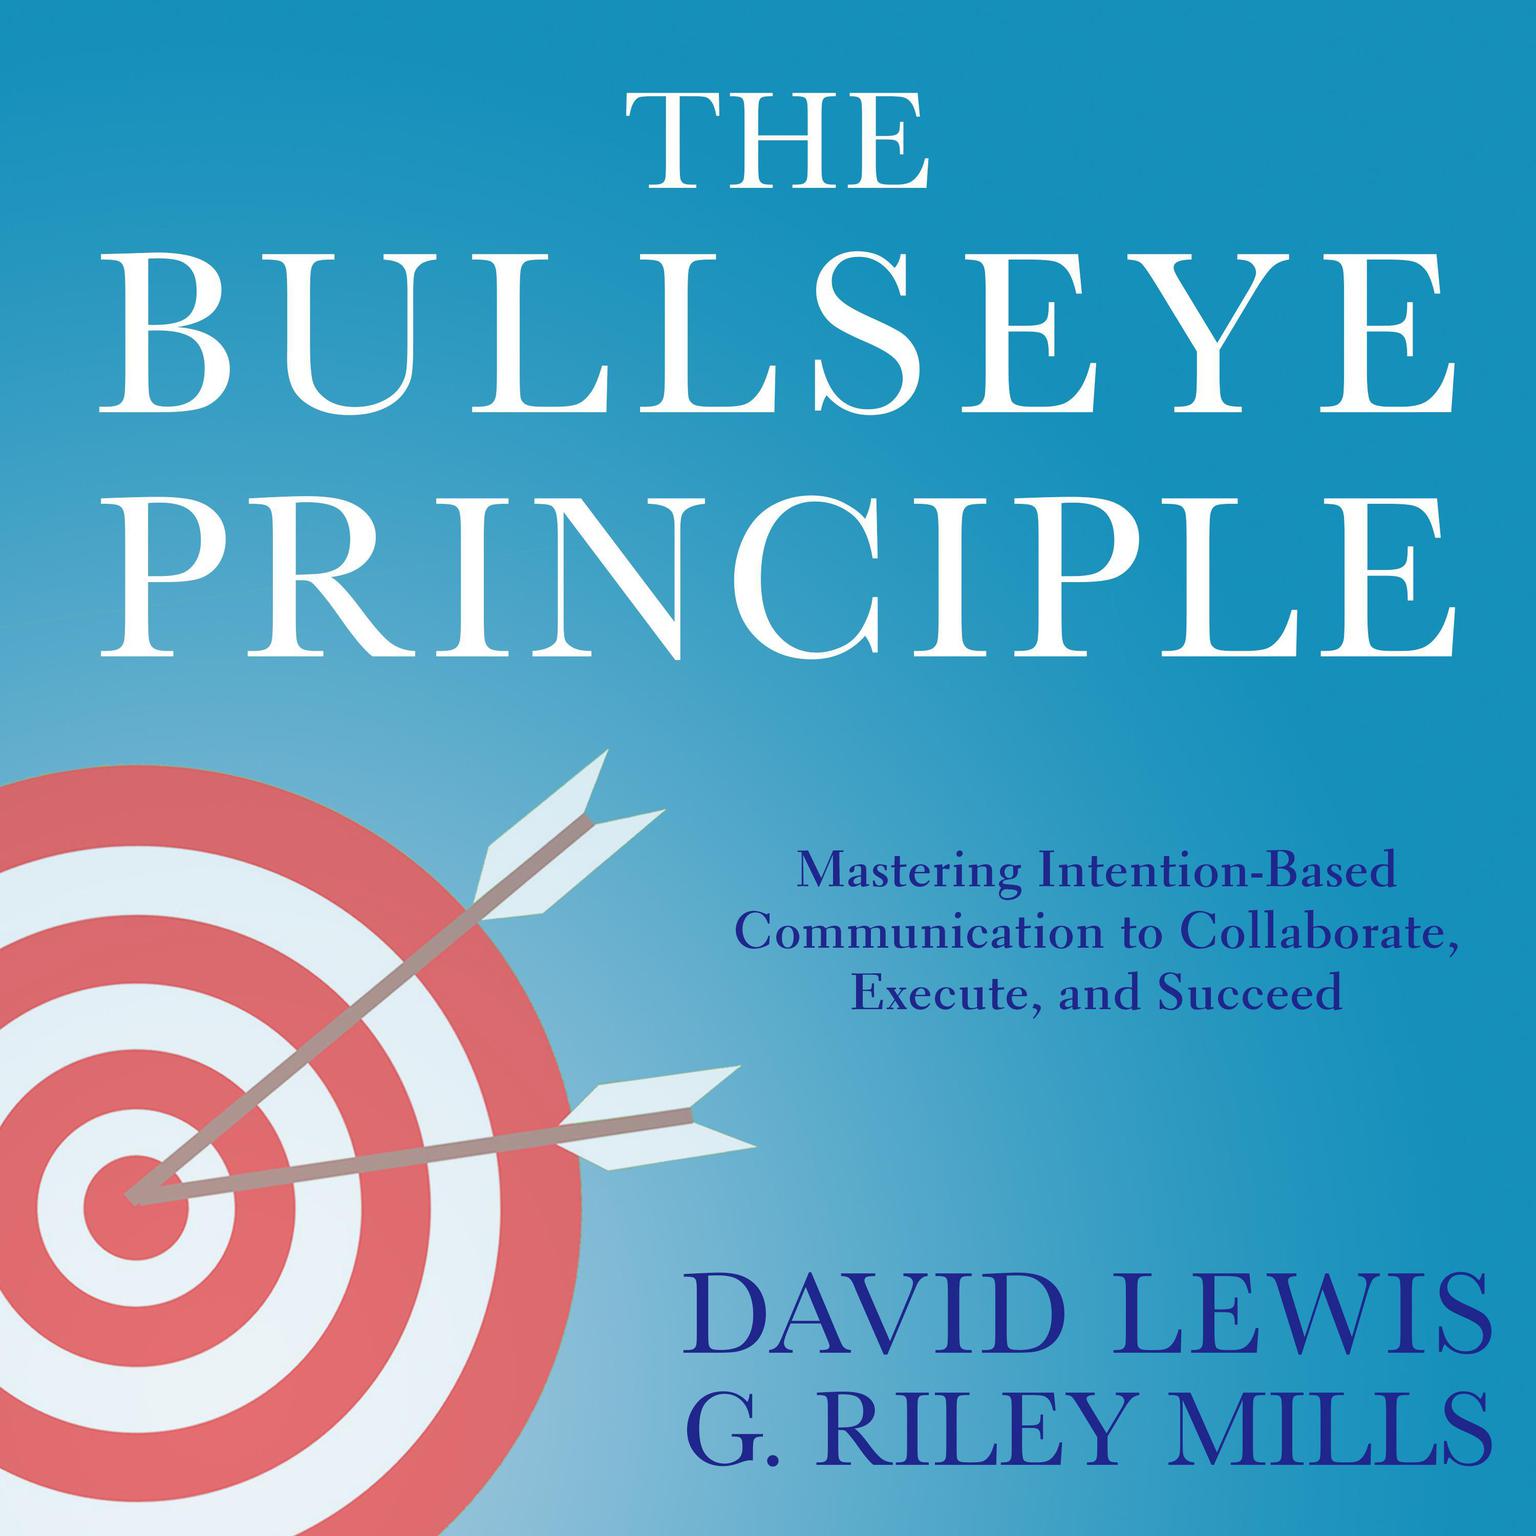 The Bullseye Principle: Mastering Intention-Based Communication to Collaborate, Execute, and Succeed Audiobook, by David Lewis